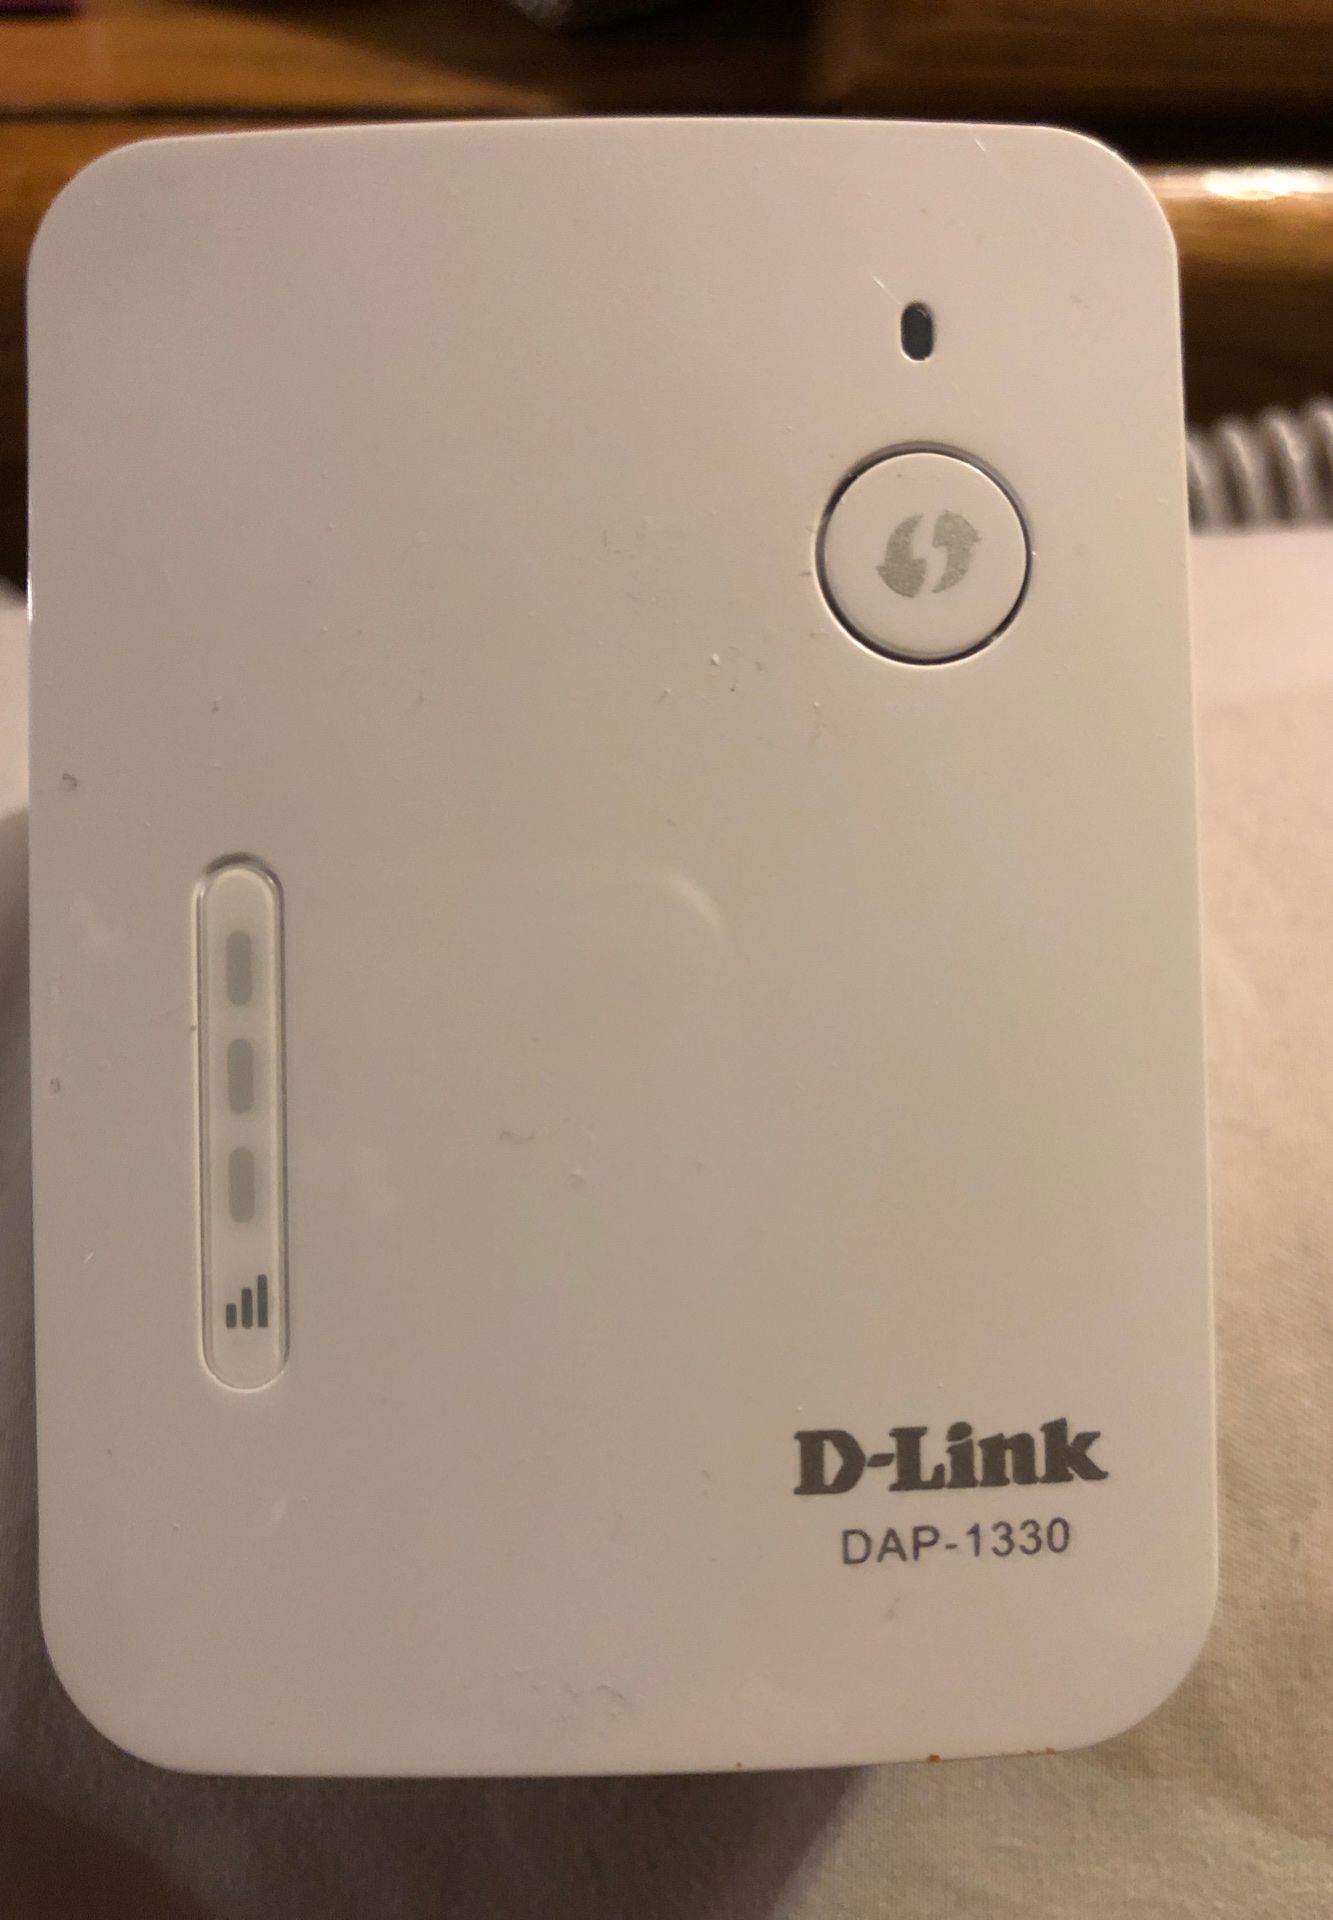 D-Link WiFi repeater/extender